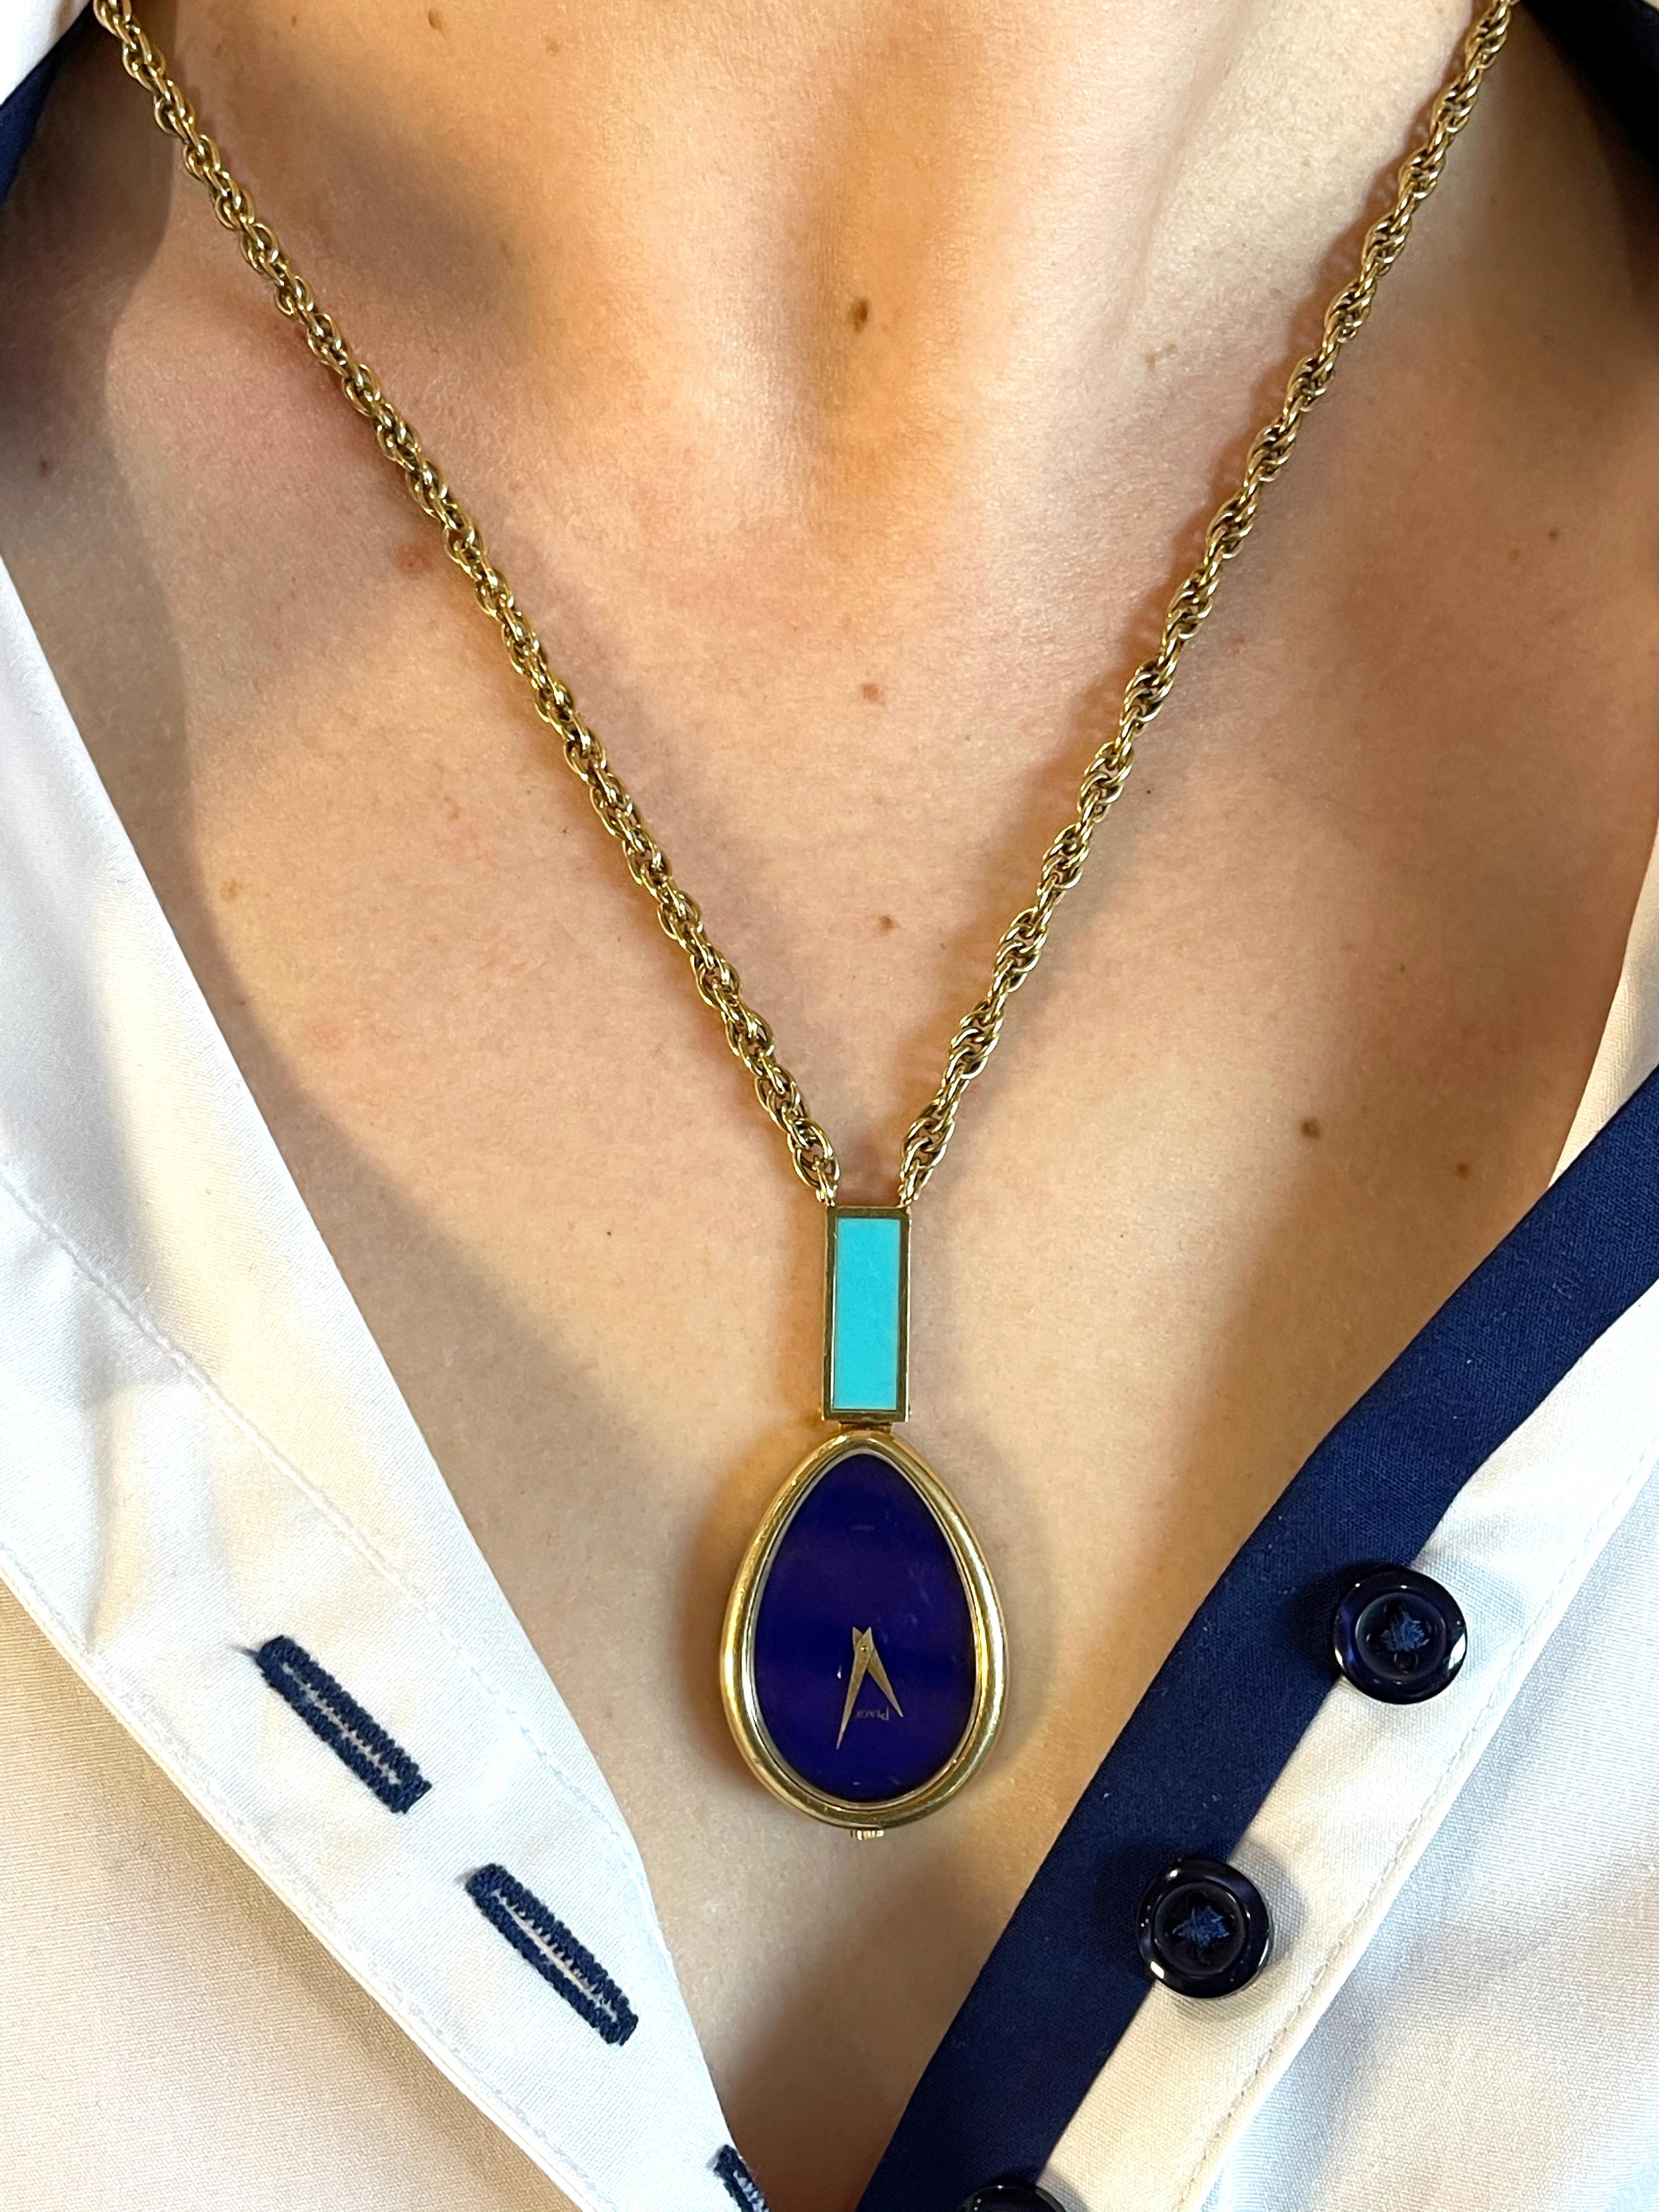 Piaget Rare 1970s Lapis Dial Turquoise Gold Watch Pendant Necklace 1